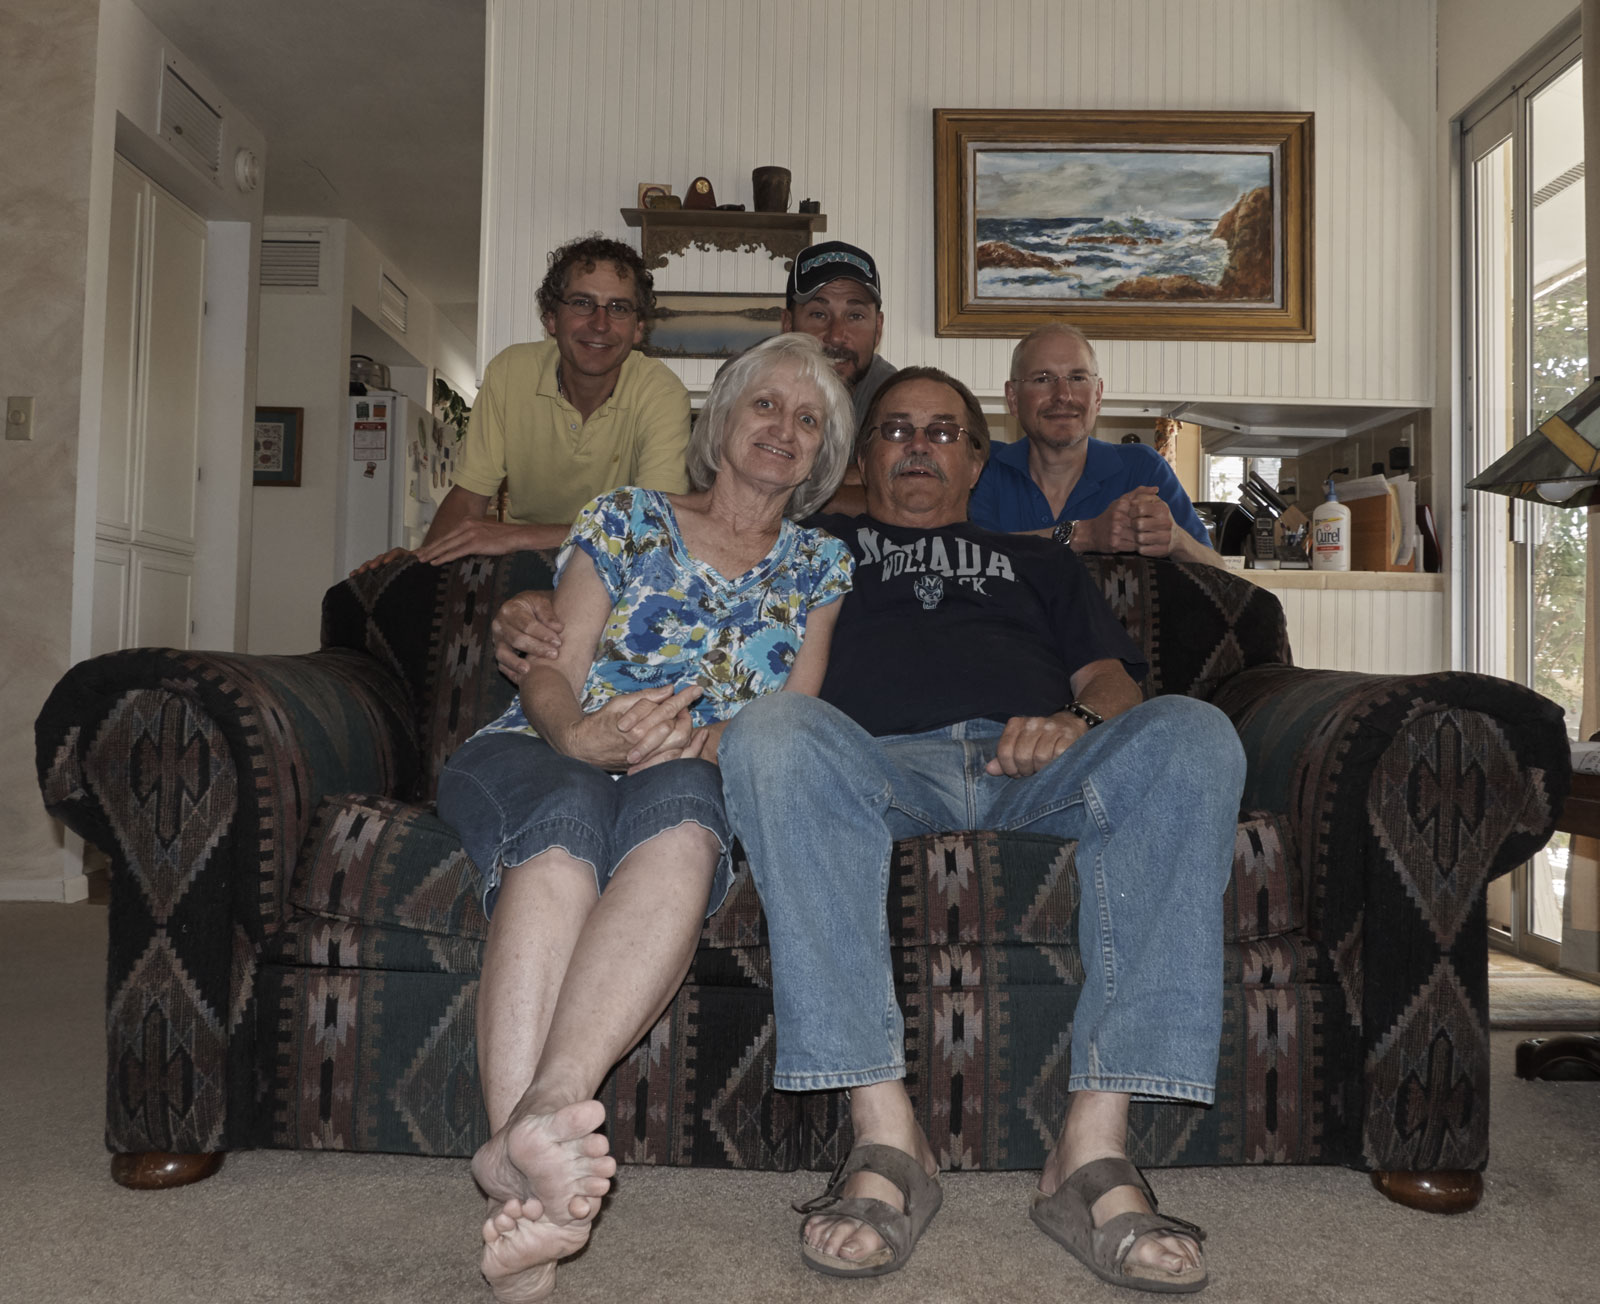 Uncle Bill and Lynne sitting on their couch, with Marc, Tom, and me behind them